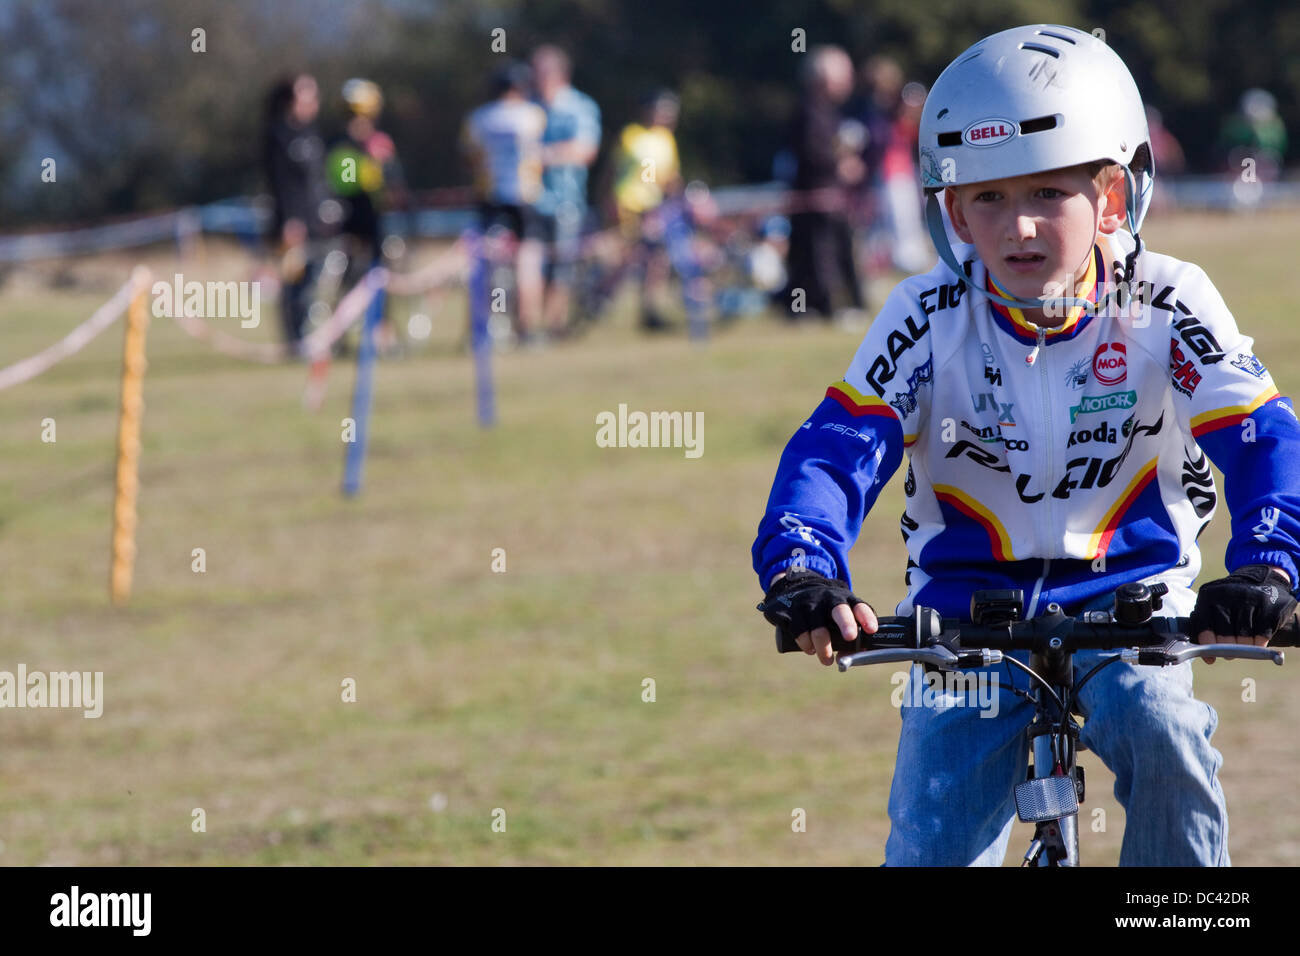 Young boy in a crash hat and cycling jersey competes in a cyclocross Stock Photo